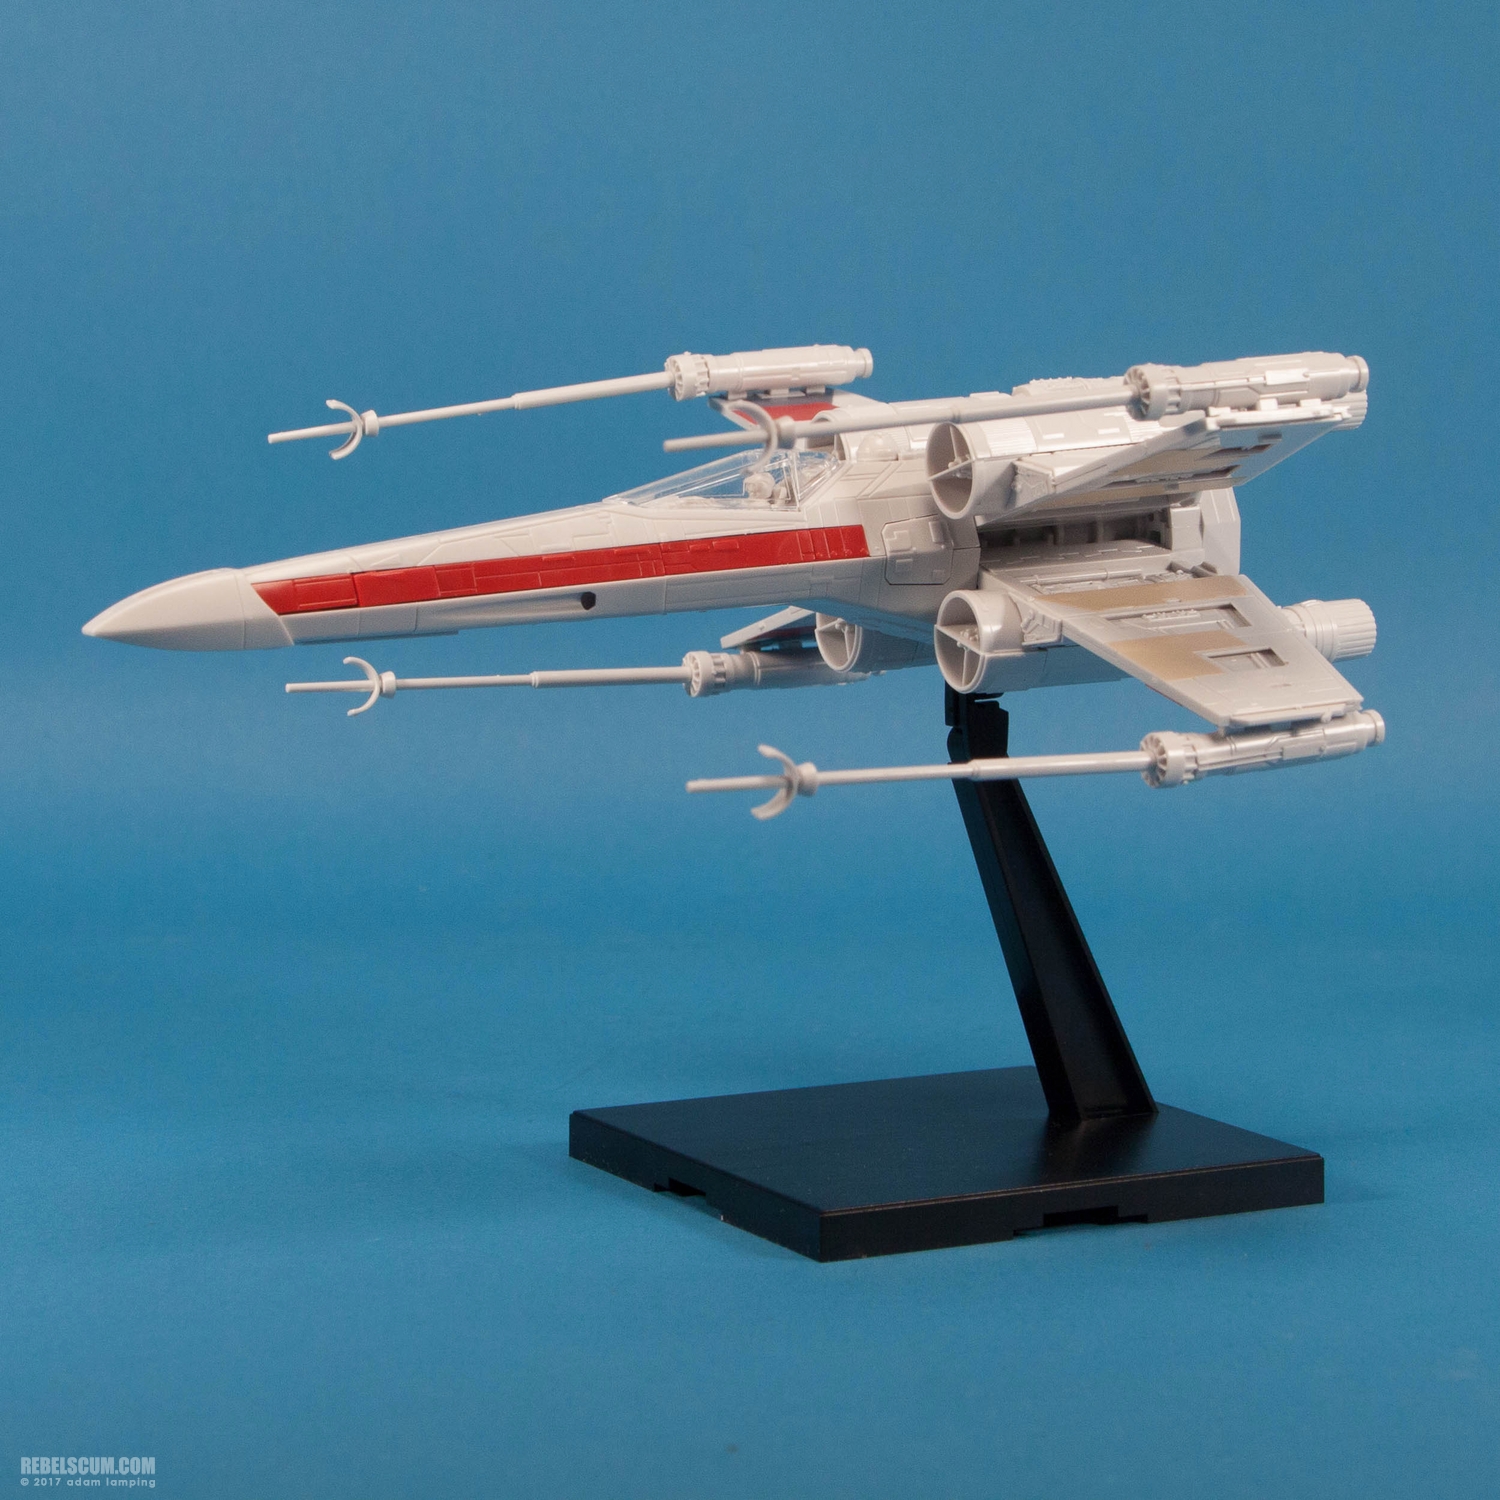 bandai-red-squadron-x-wing-starfighter-scale-model-kit-003.jpg